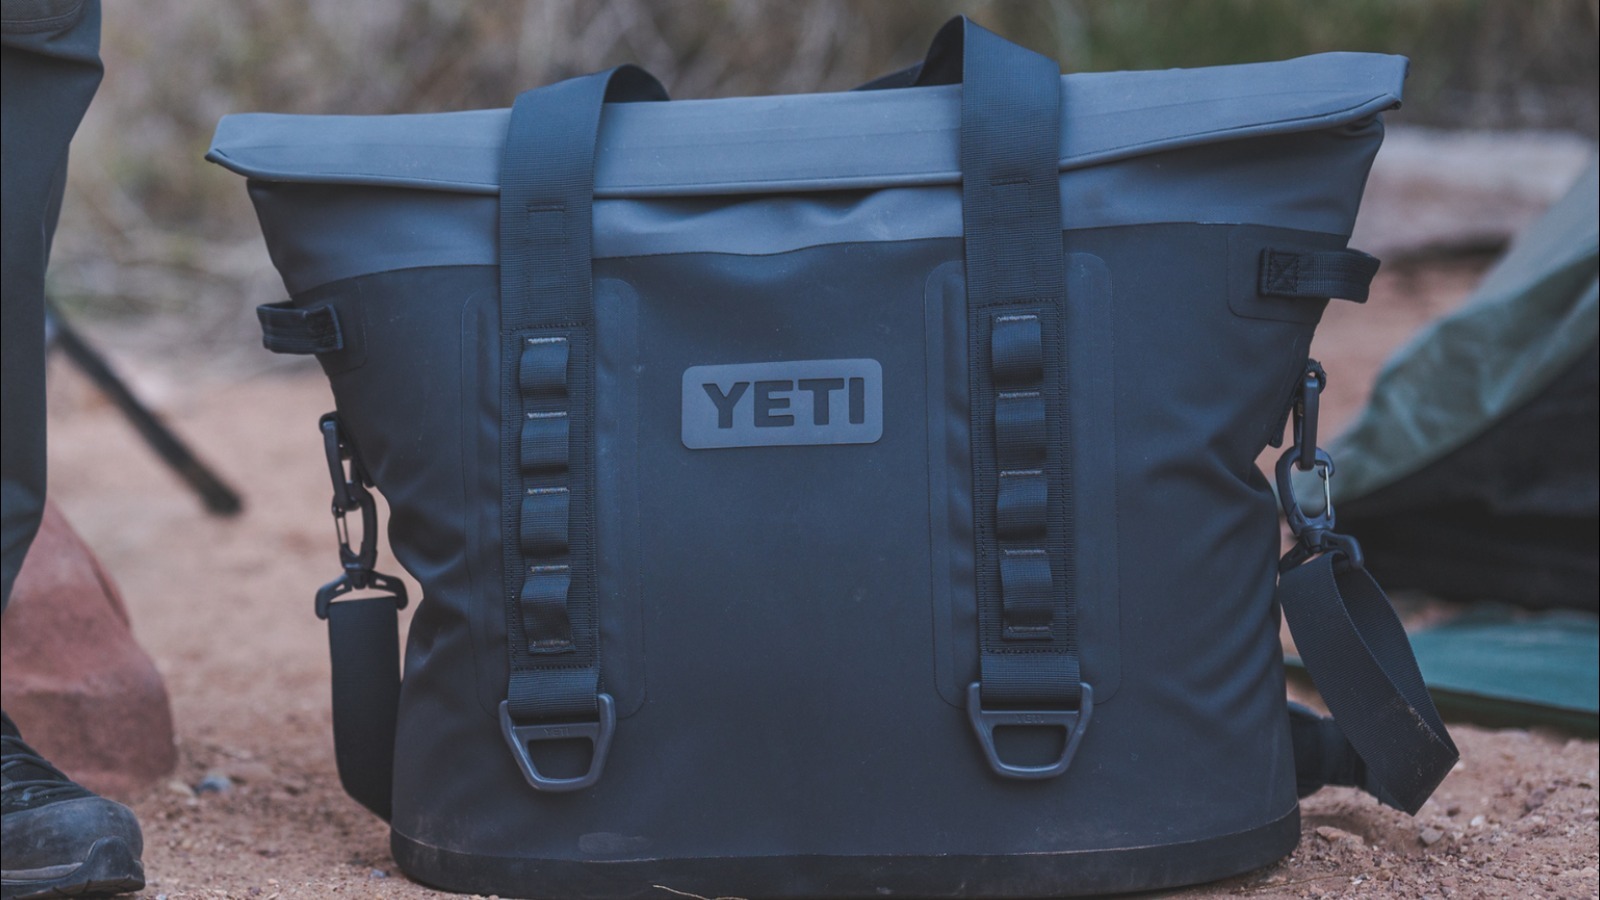 https://www.mashed.com/img/gallery/yeti-is-recalling-millions-of-coolers-and-gear-cases-due-to-loose-magnets/l-intro-1678470941.jpg